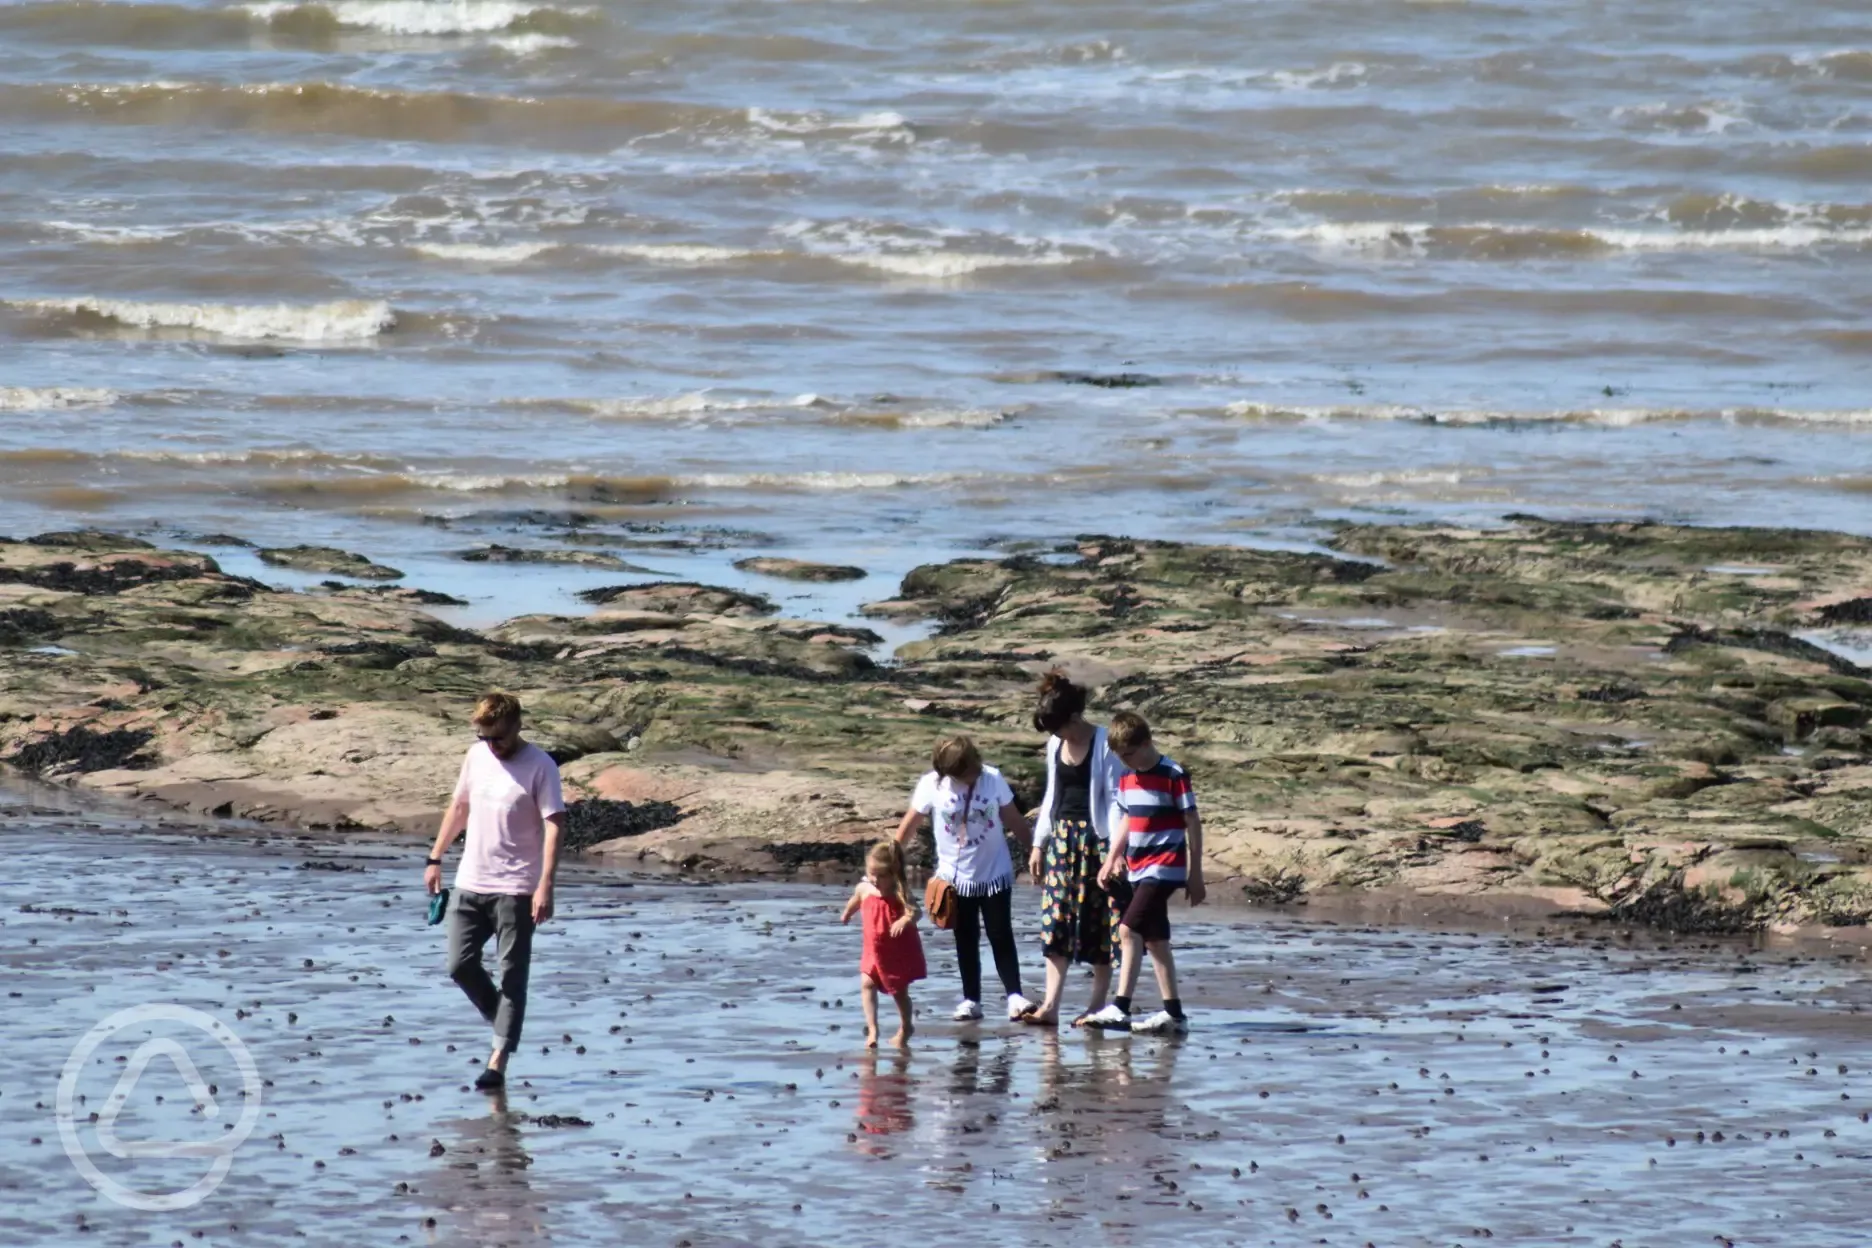 Enjoy fossil hunting or rambling along the scenic beach